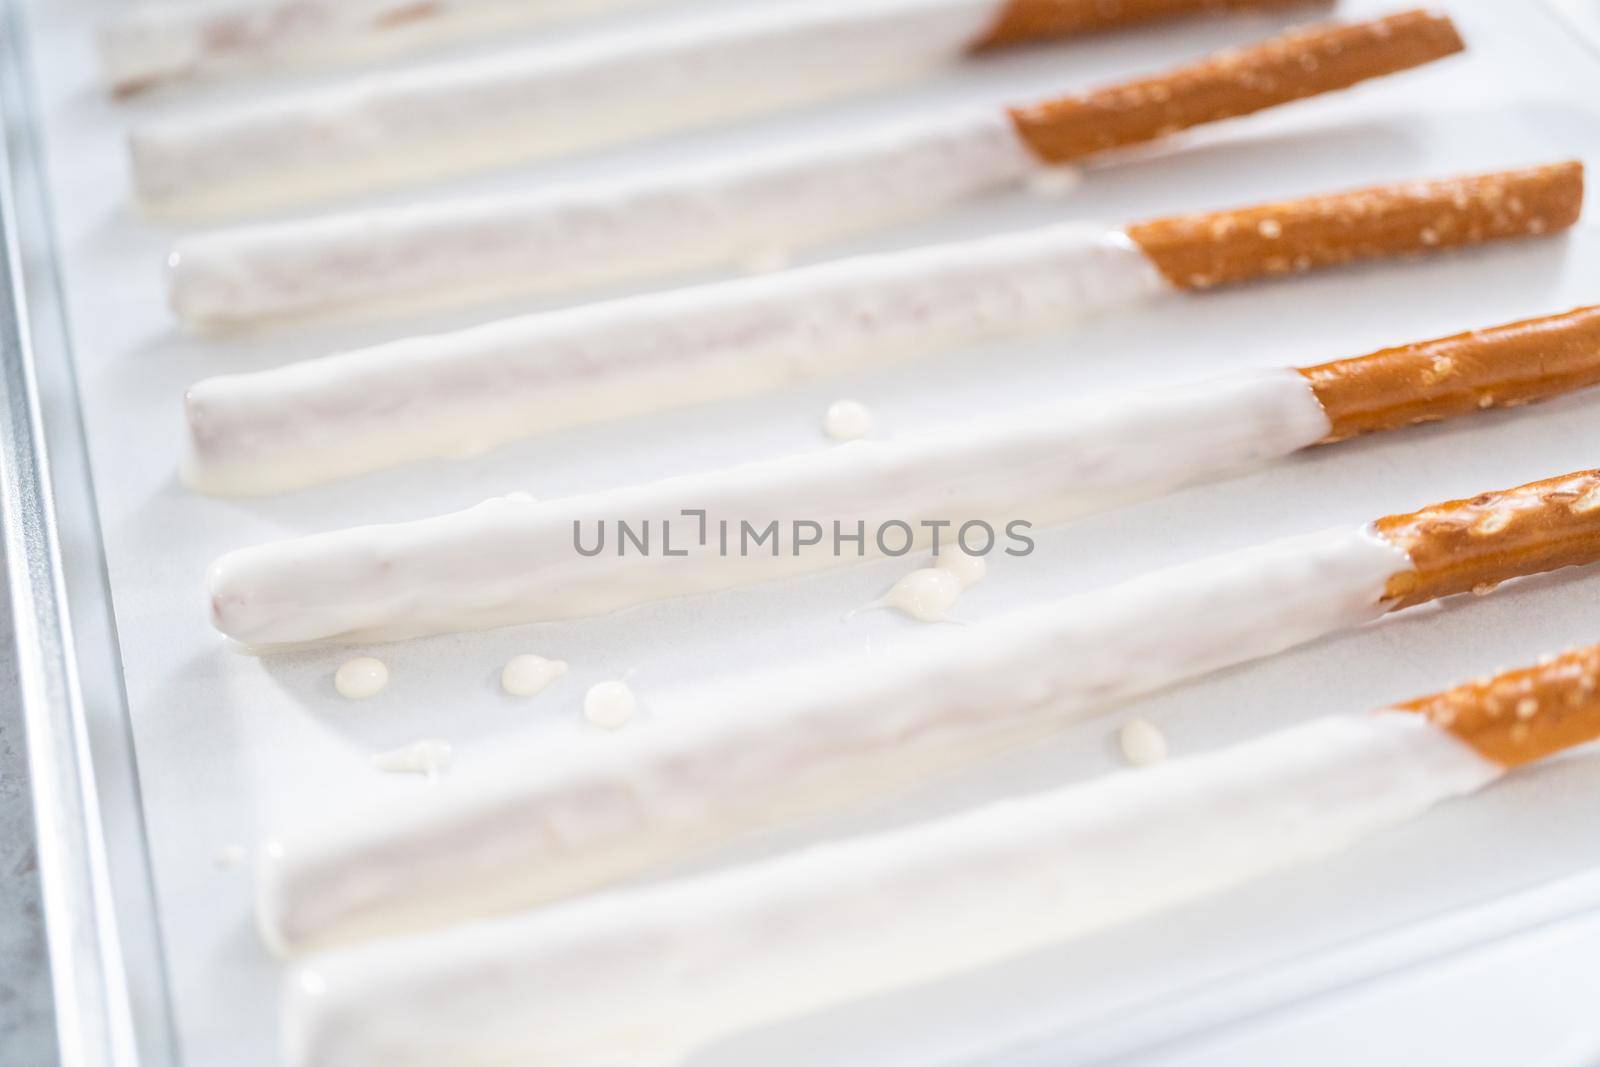 Dipping pretzel rods into the melted chocolate to prepare chocolate dipped pretzel rods for the July 4th celebration.